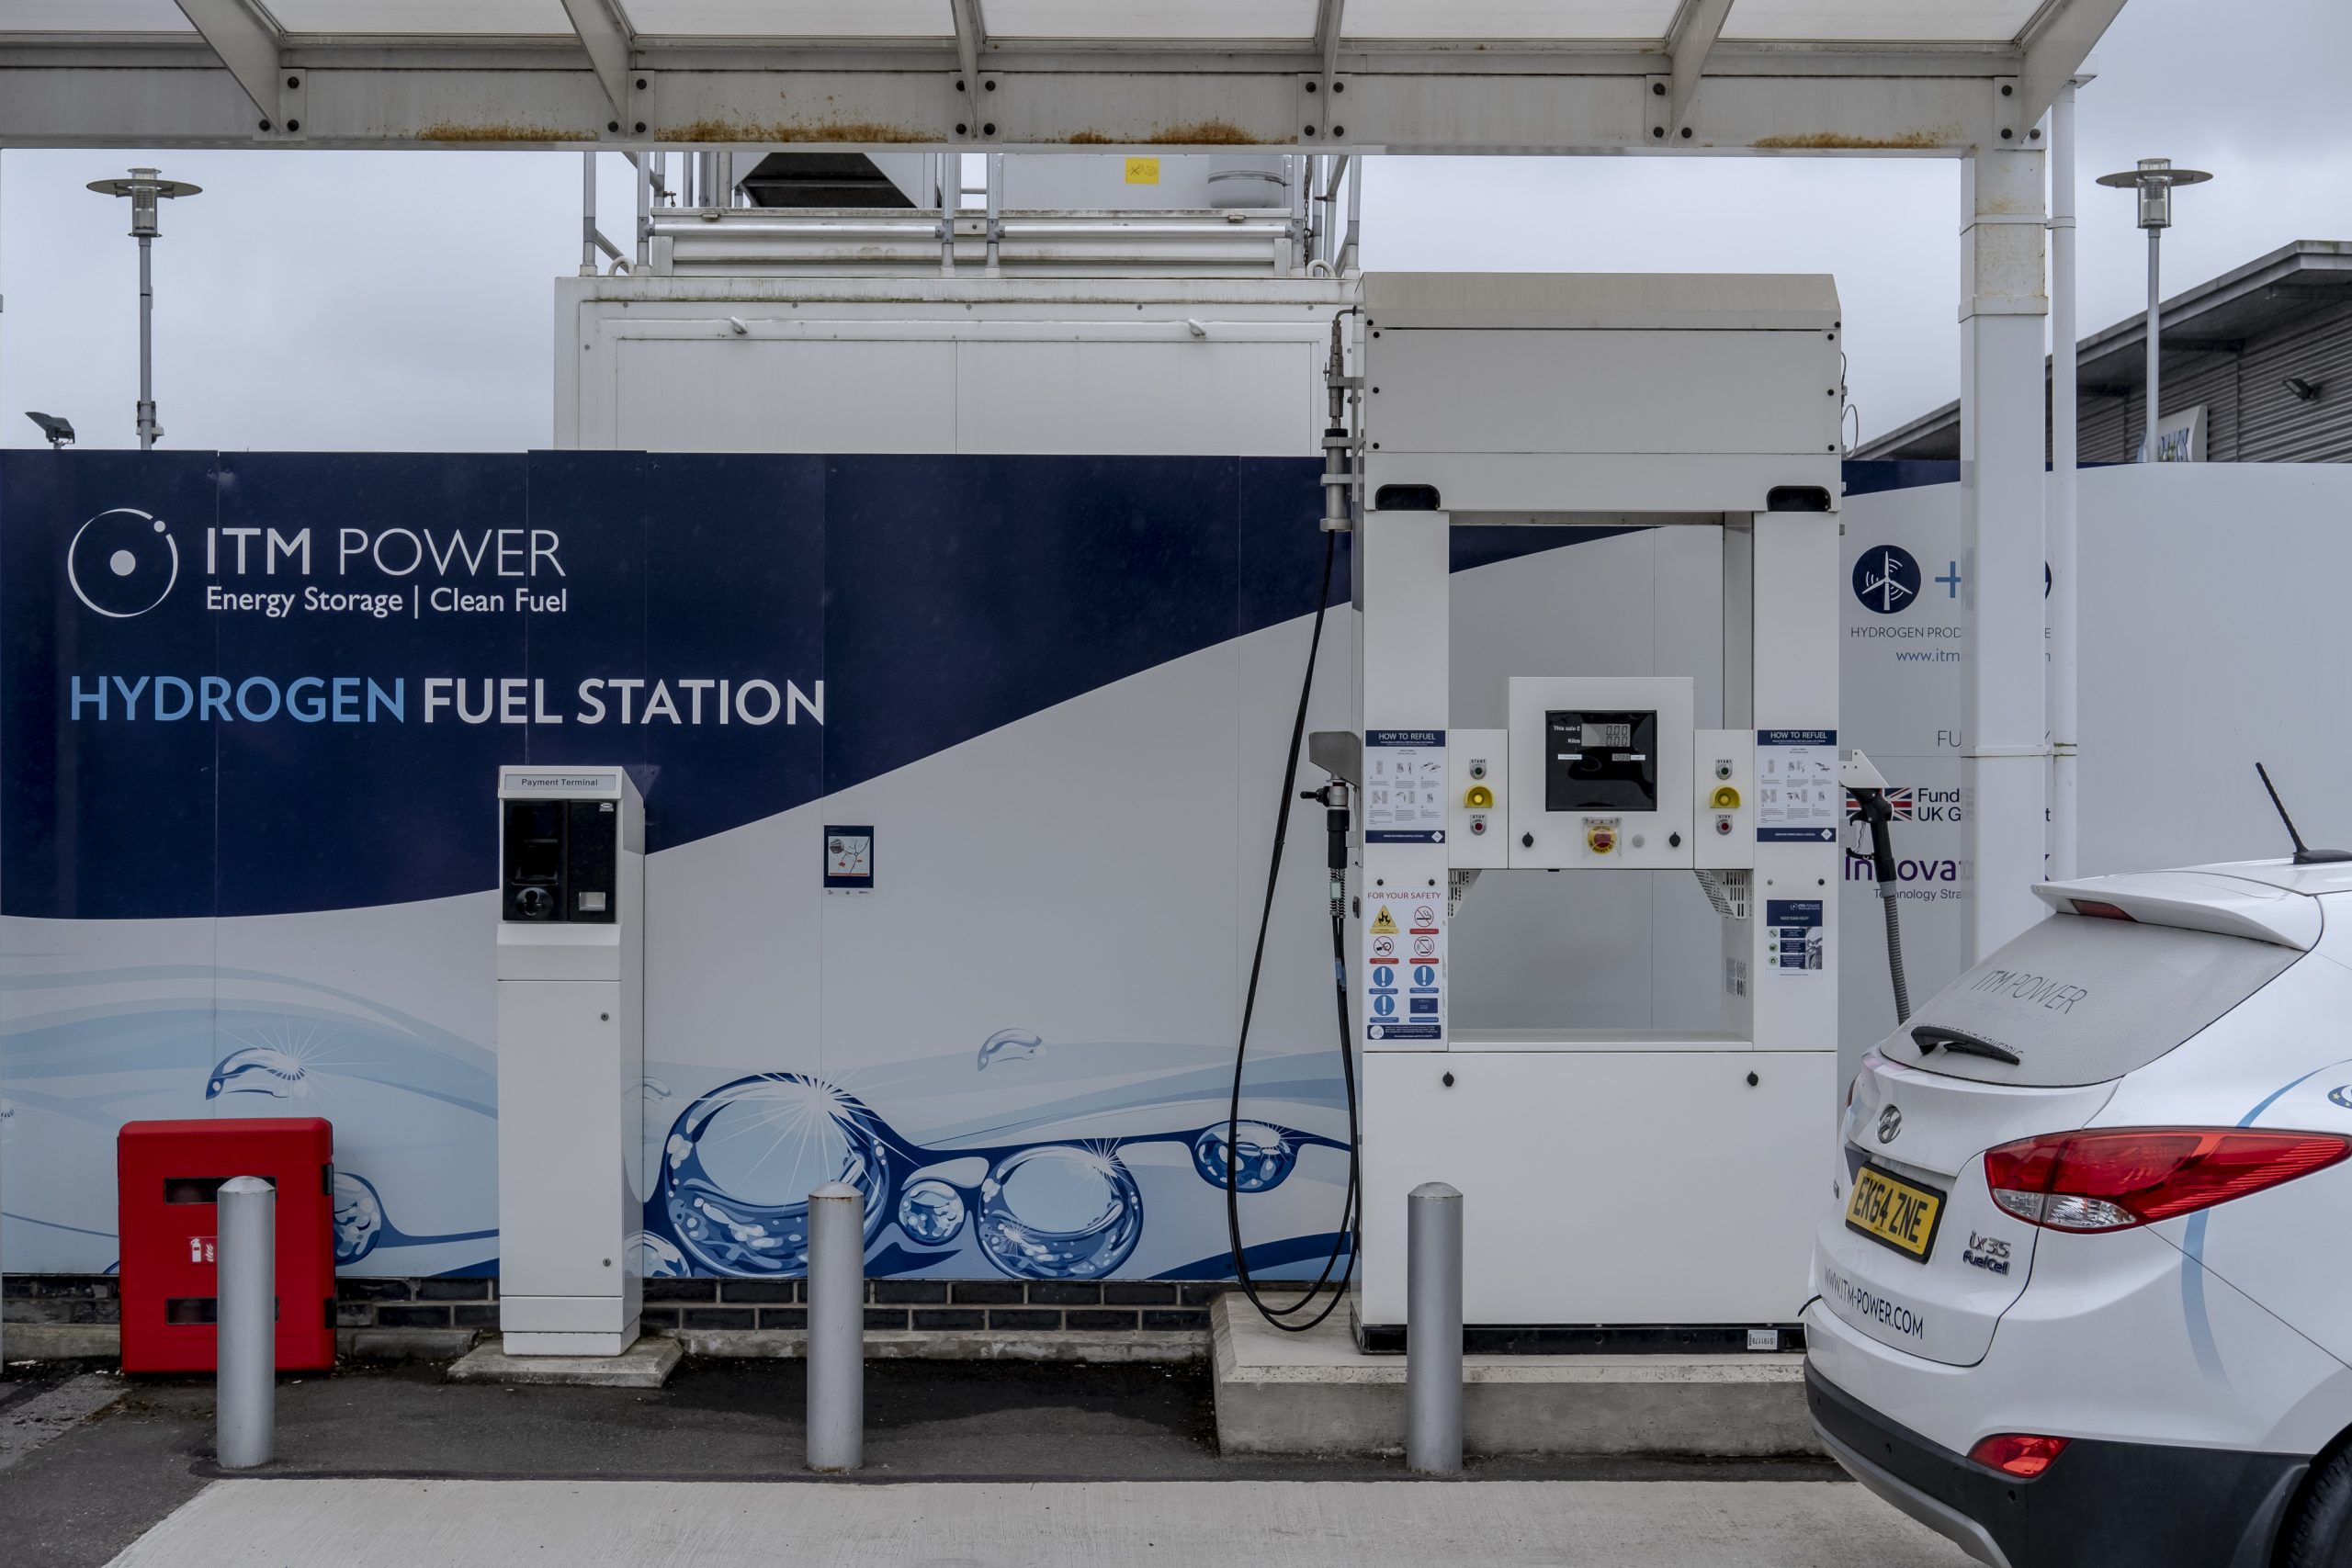 A Hydrogen refuelling station in Sheffield, England, June 26, 2021. Hydrogen is super-abundant, and its potential as a clean fuel is enormous. But it can be expensive to separate from other elements without causing more pollution. Some companies are working to change that. (Andrew Testa/The New York Times)